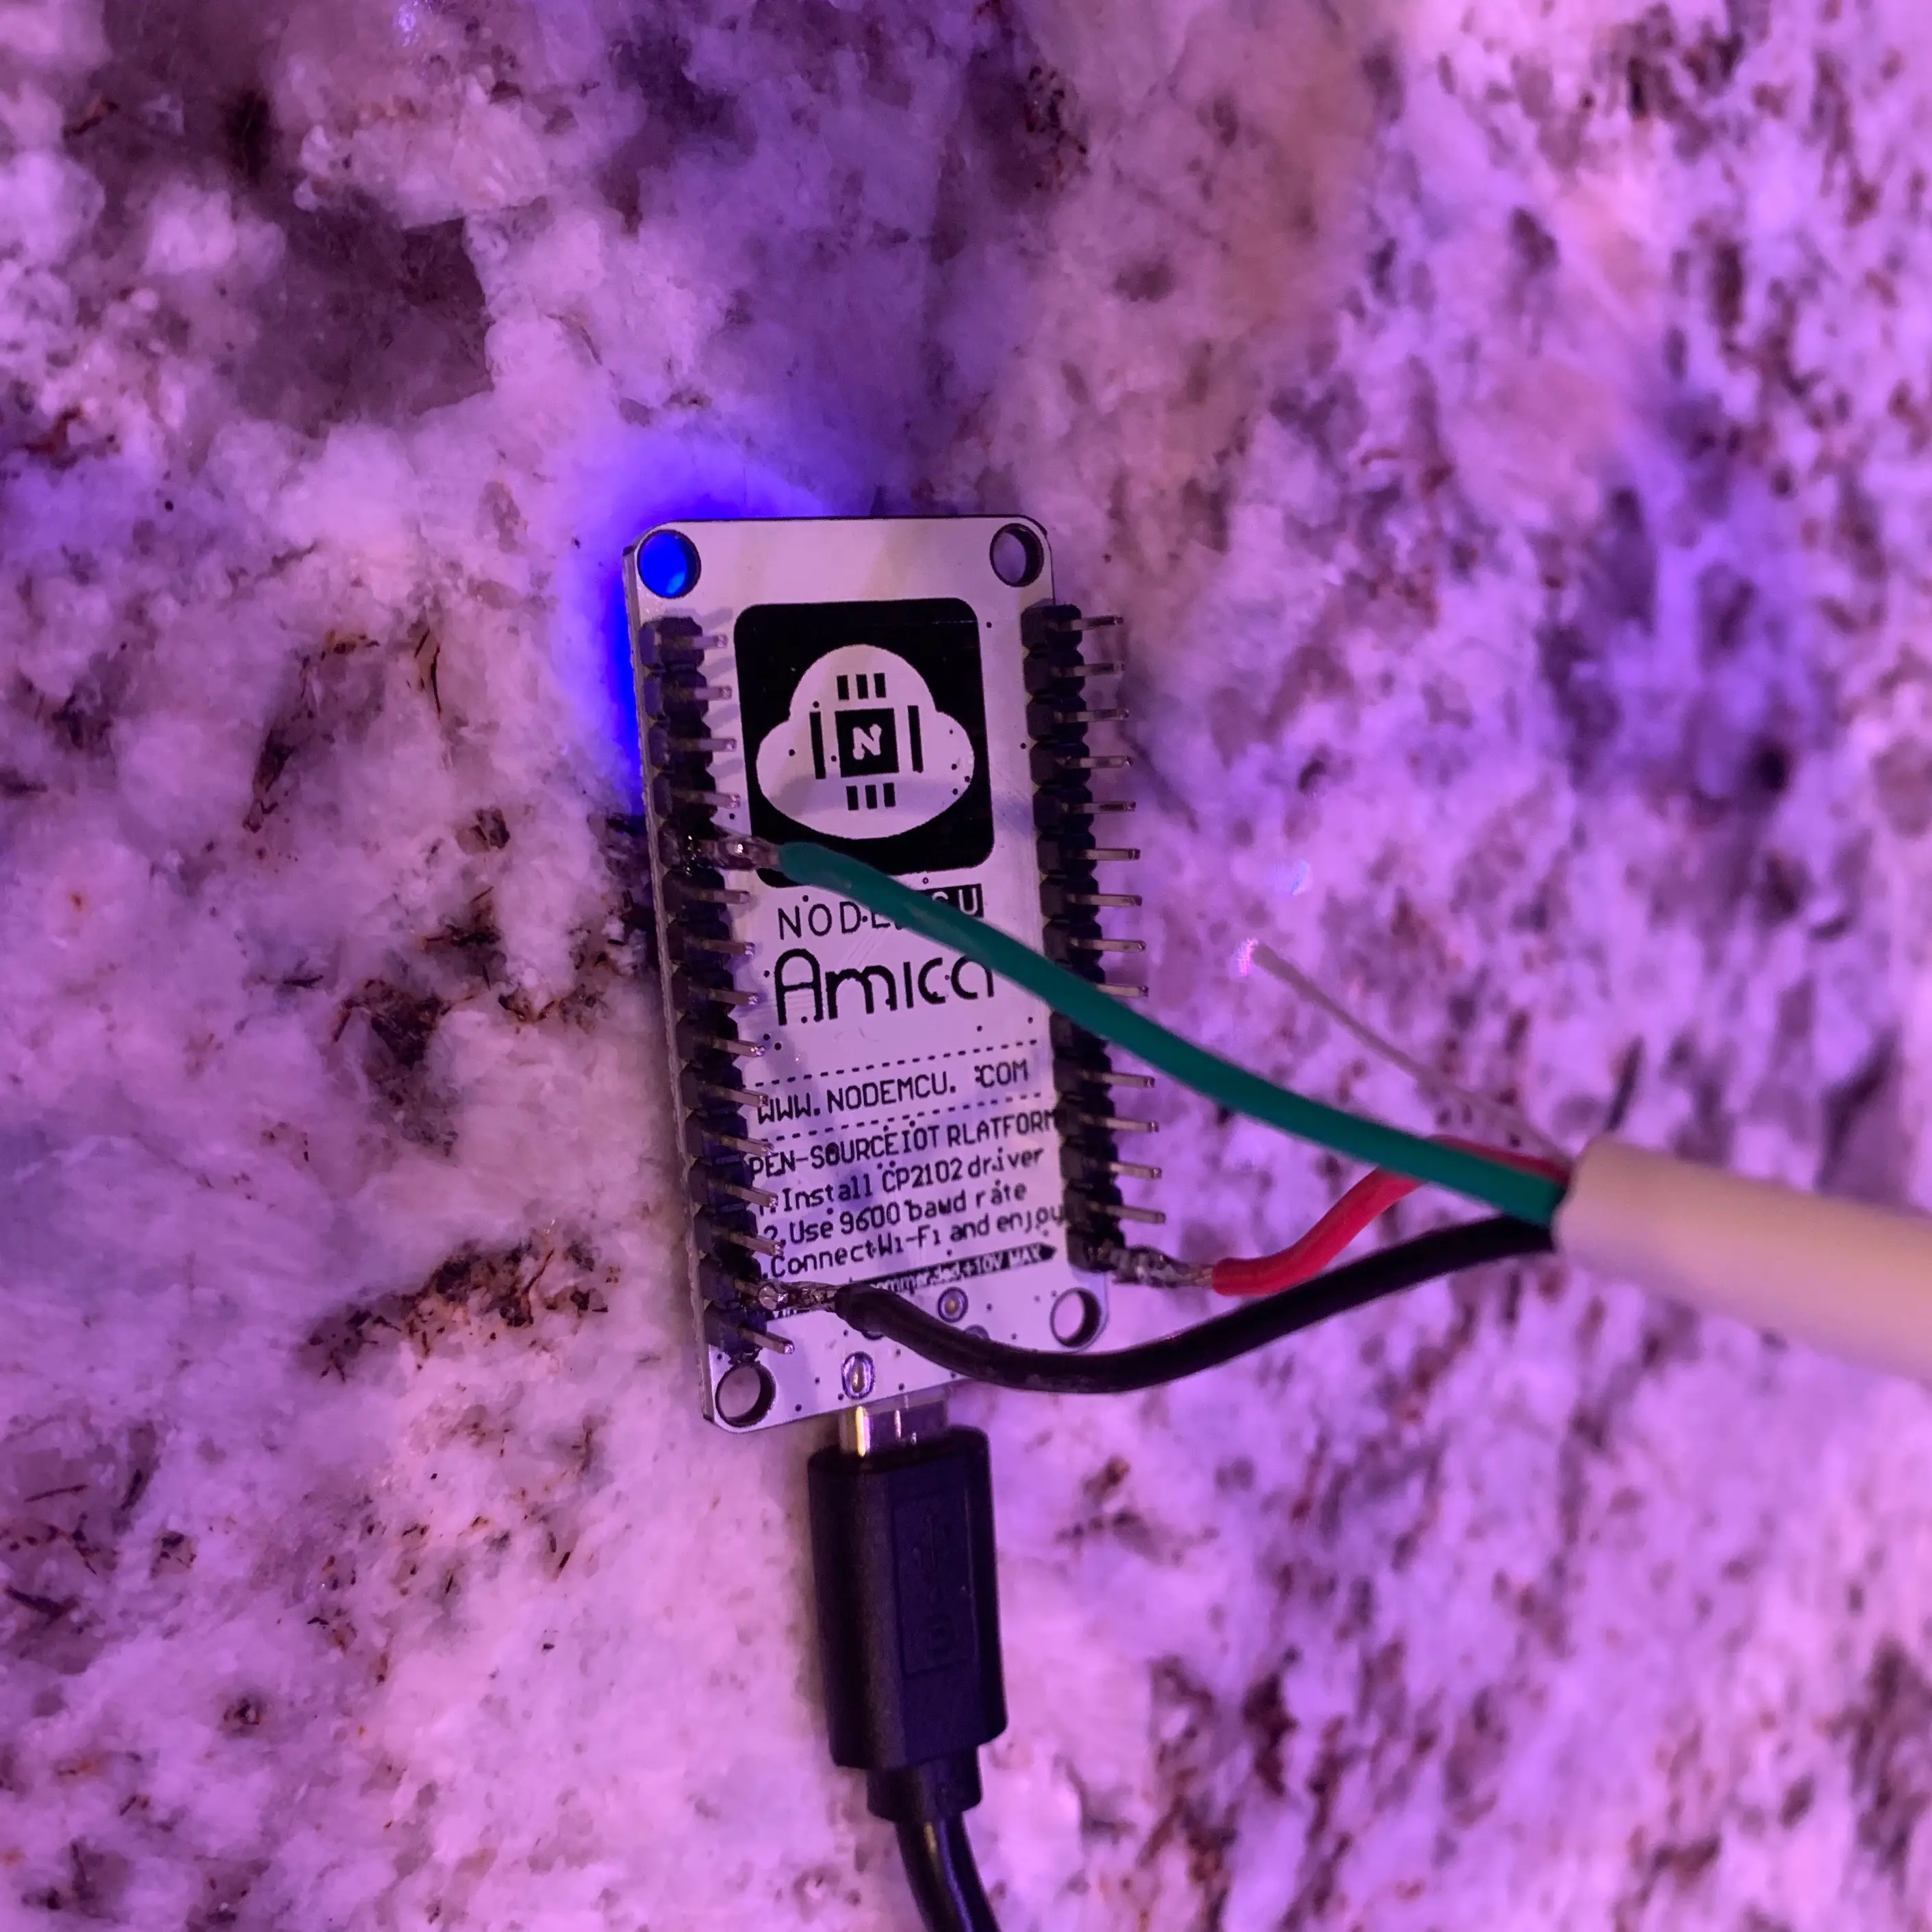 leds connected to esp8266